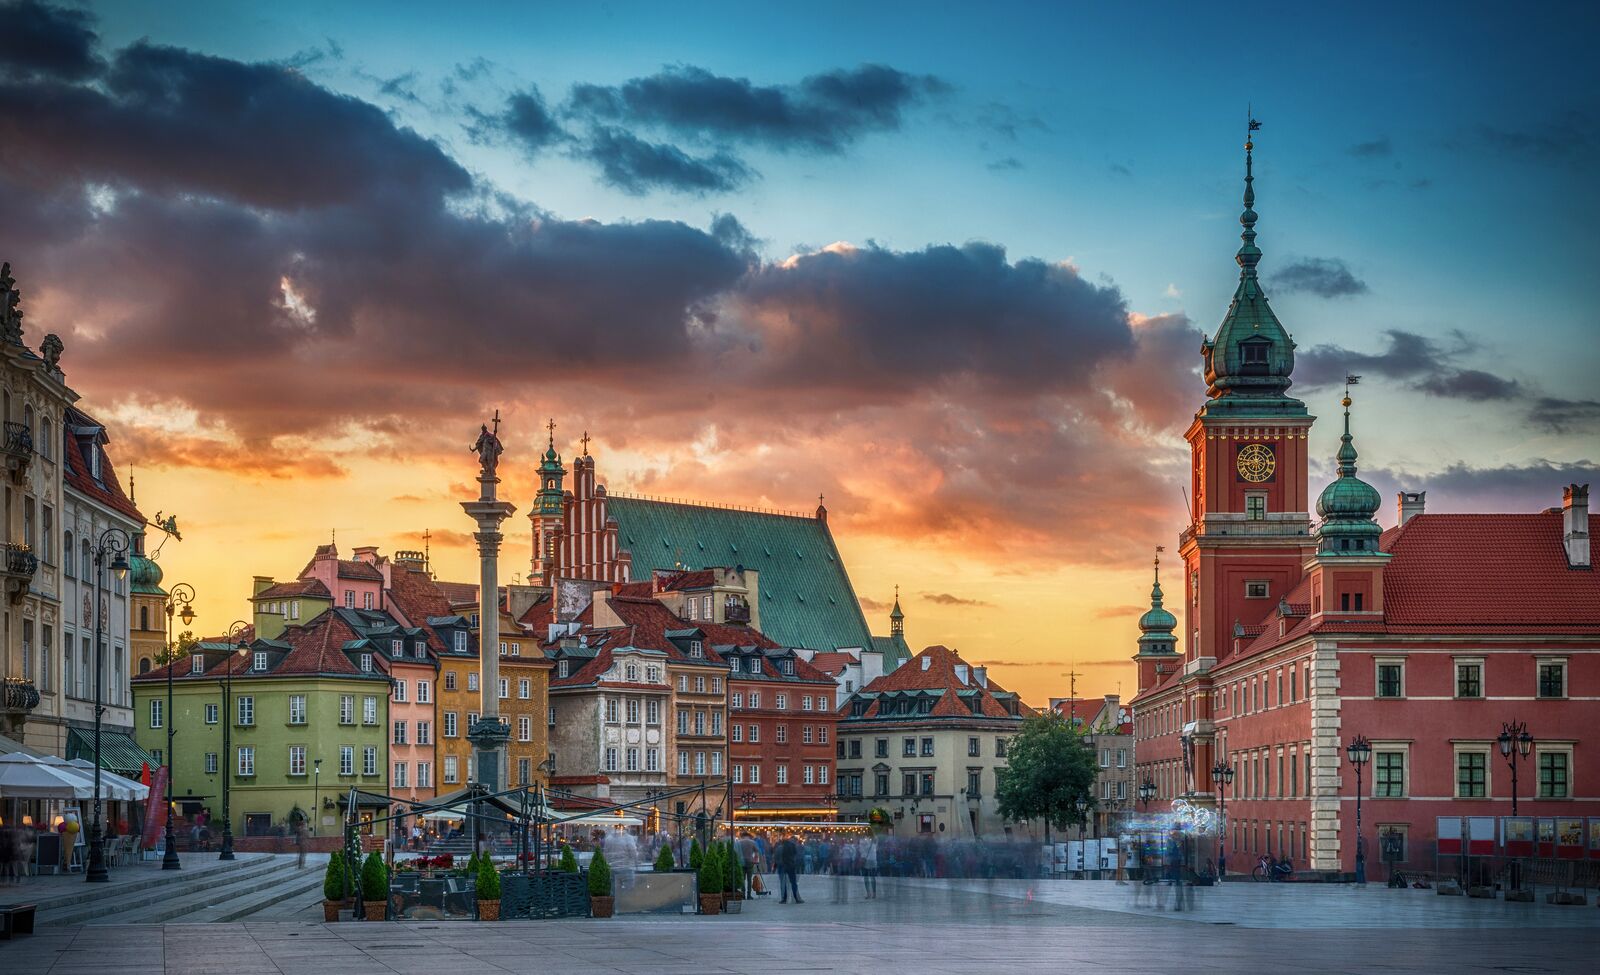 Royal Castle, ancient townhouses and Sigismund's Column in Old town in Warsaw, Poland. Evening view, long exposure.